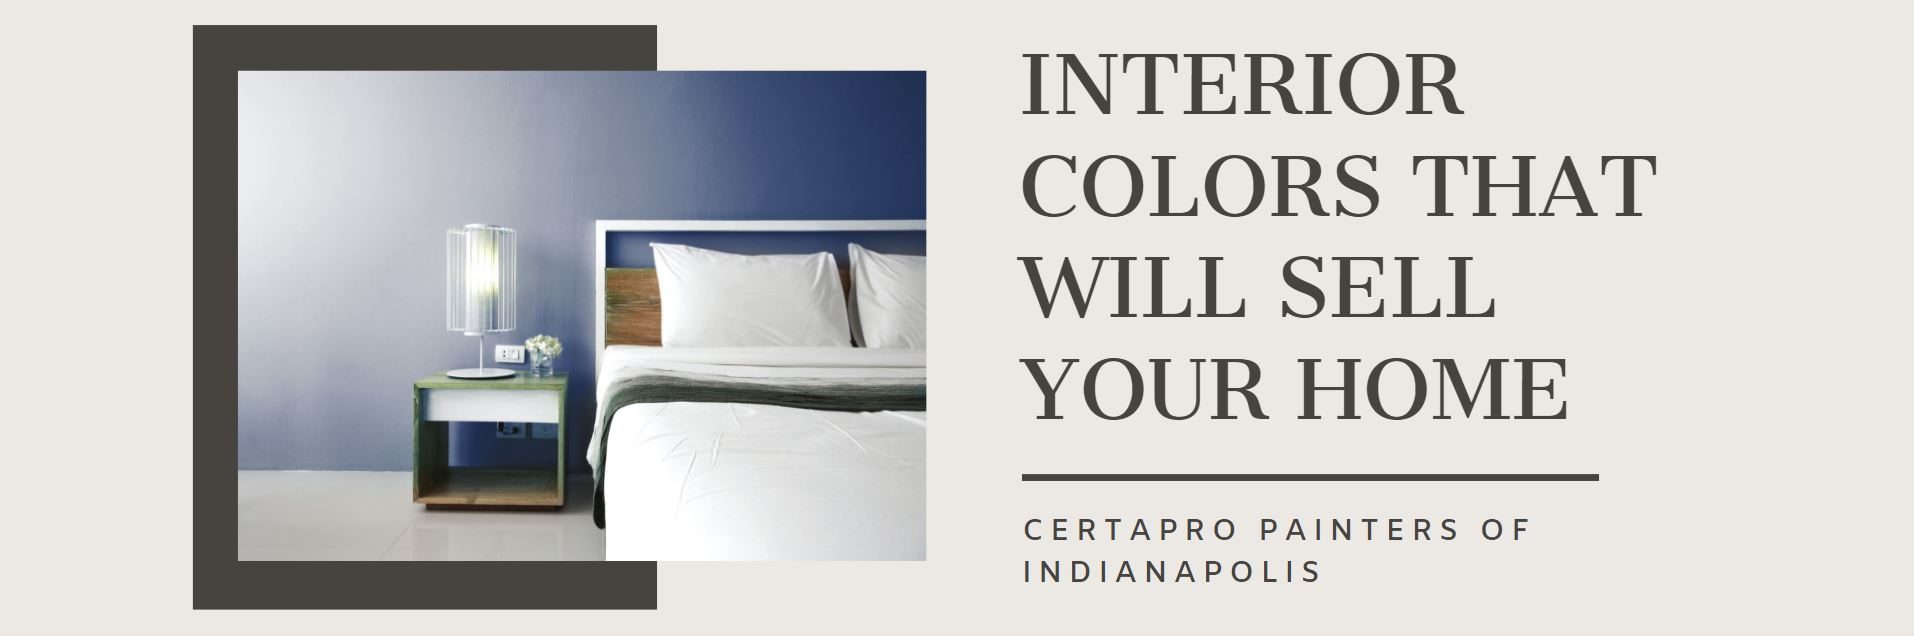 Interior Colors For Selling A Home Indianapolis In